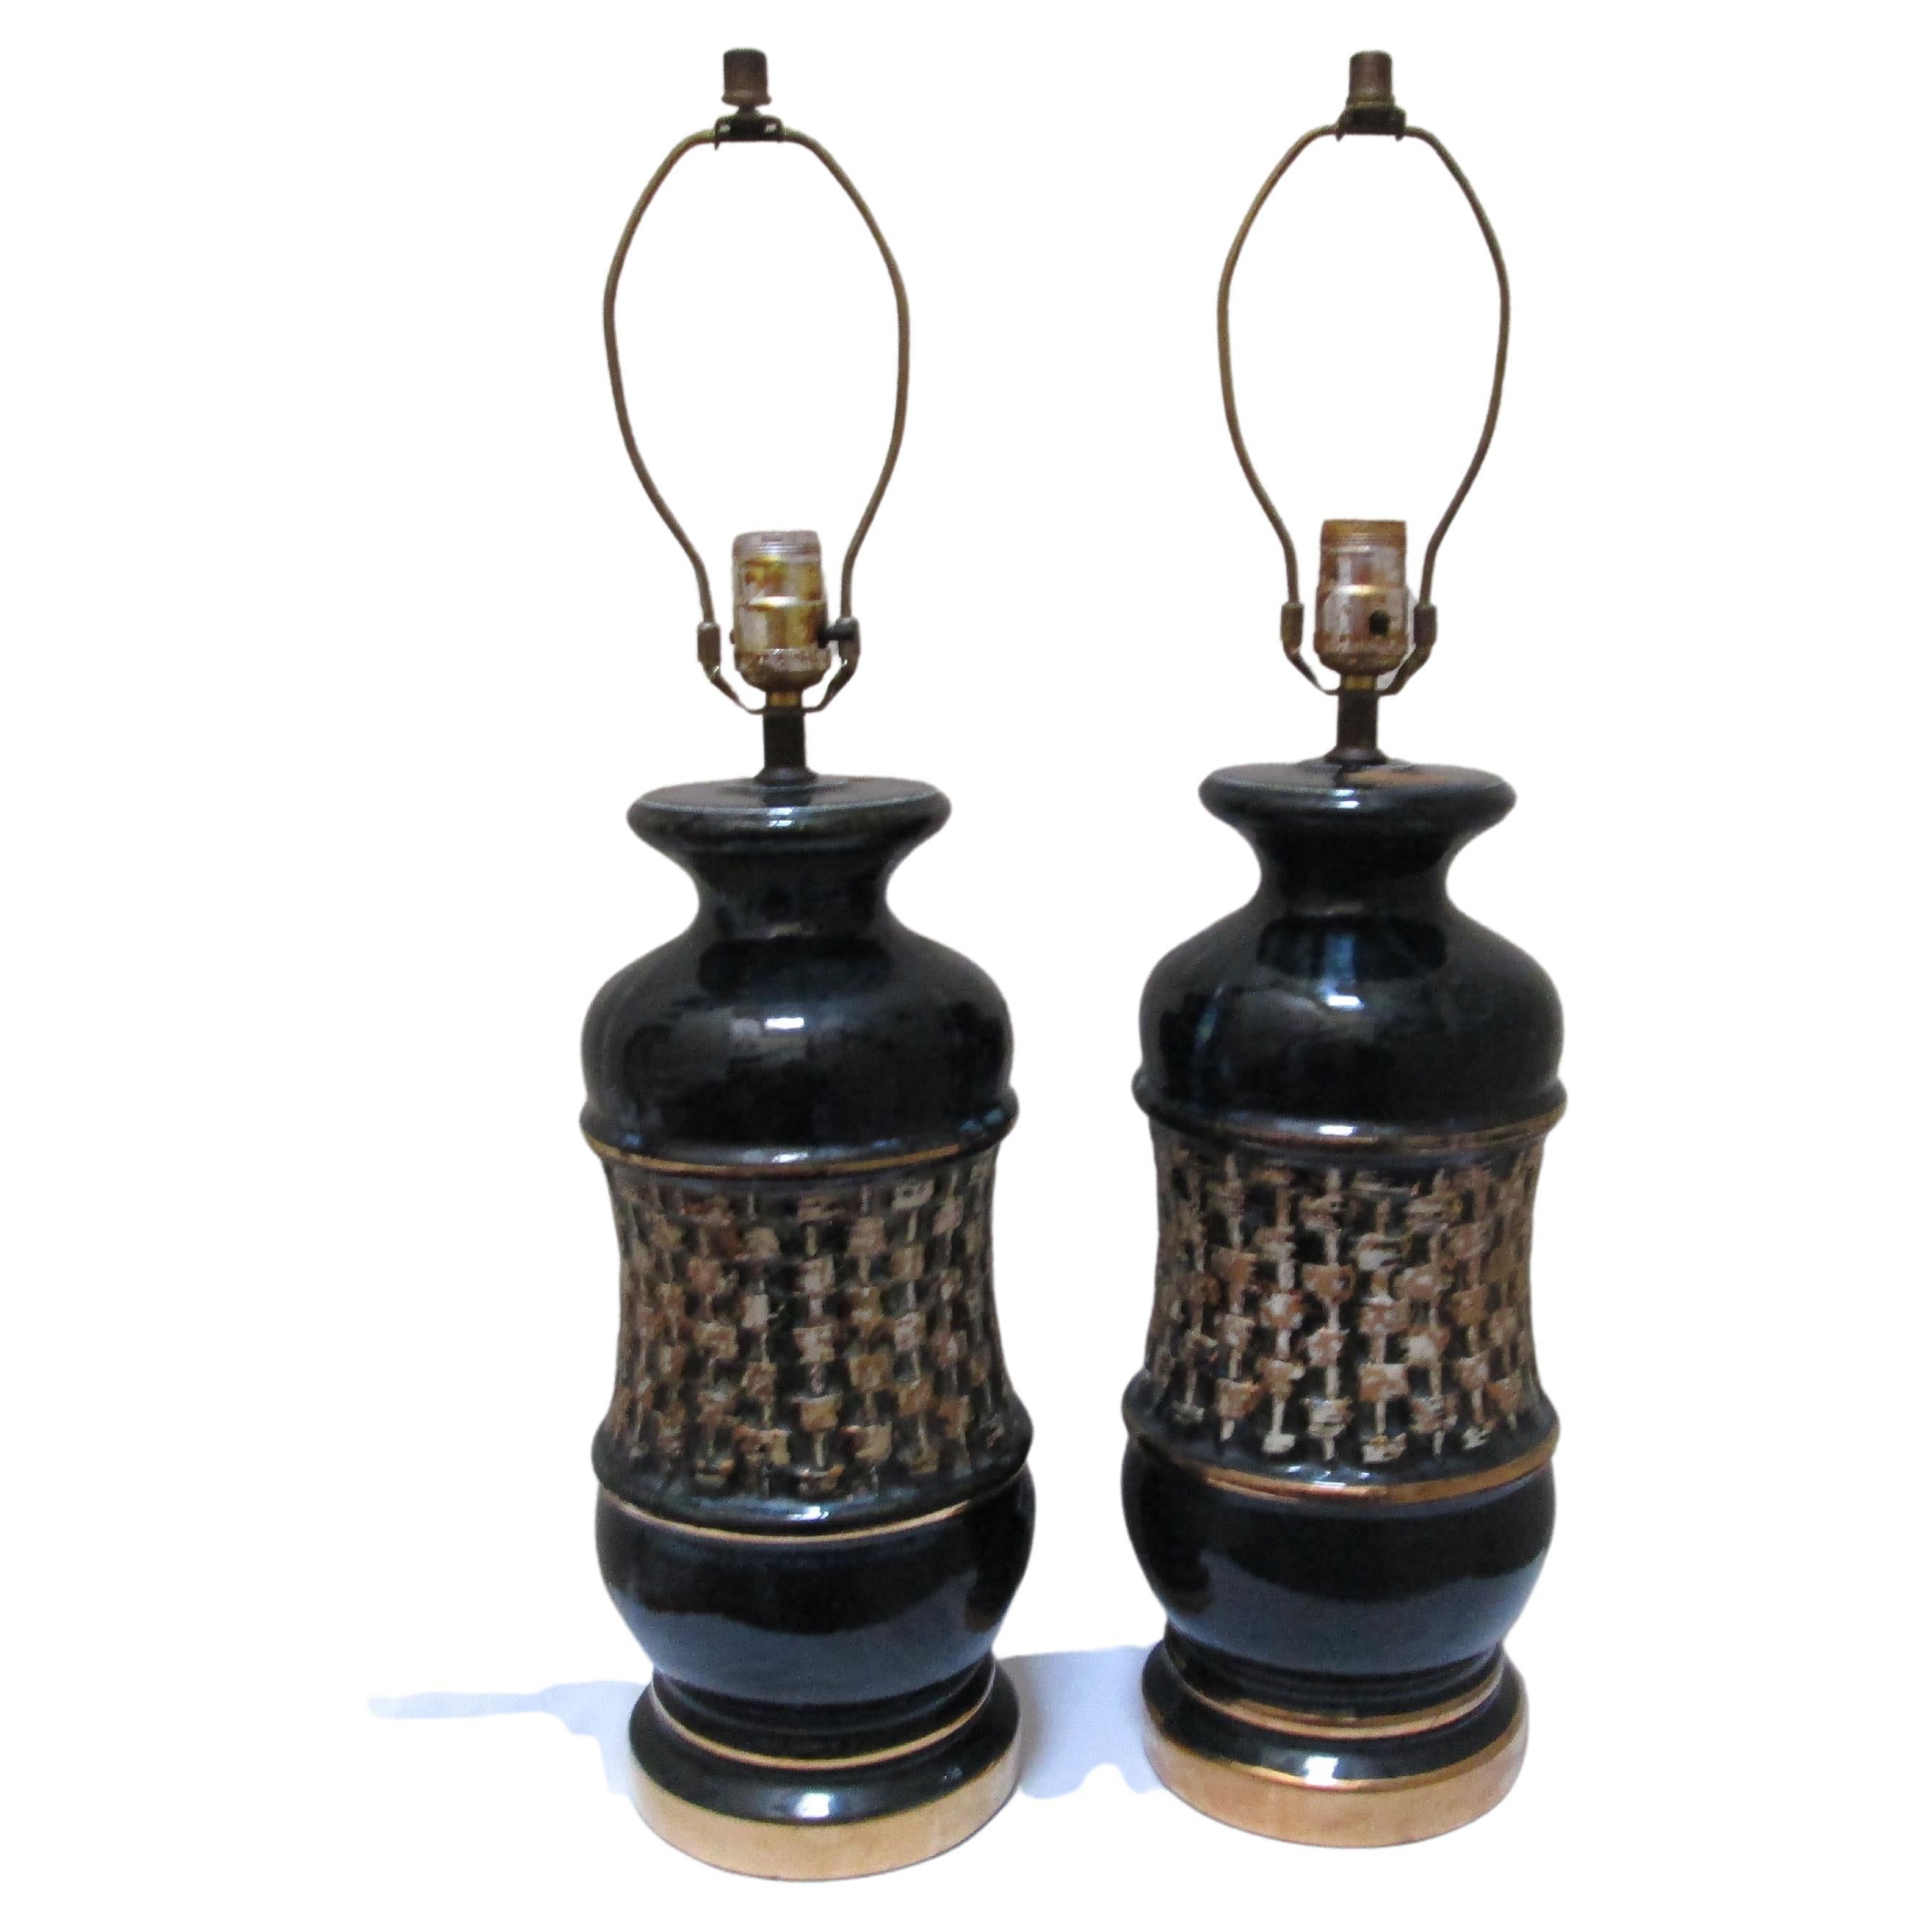 Iridescent Pair of Black and Gold Ceramic High Glaze Mid Century Table Lamps For Sale